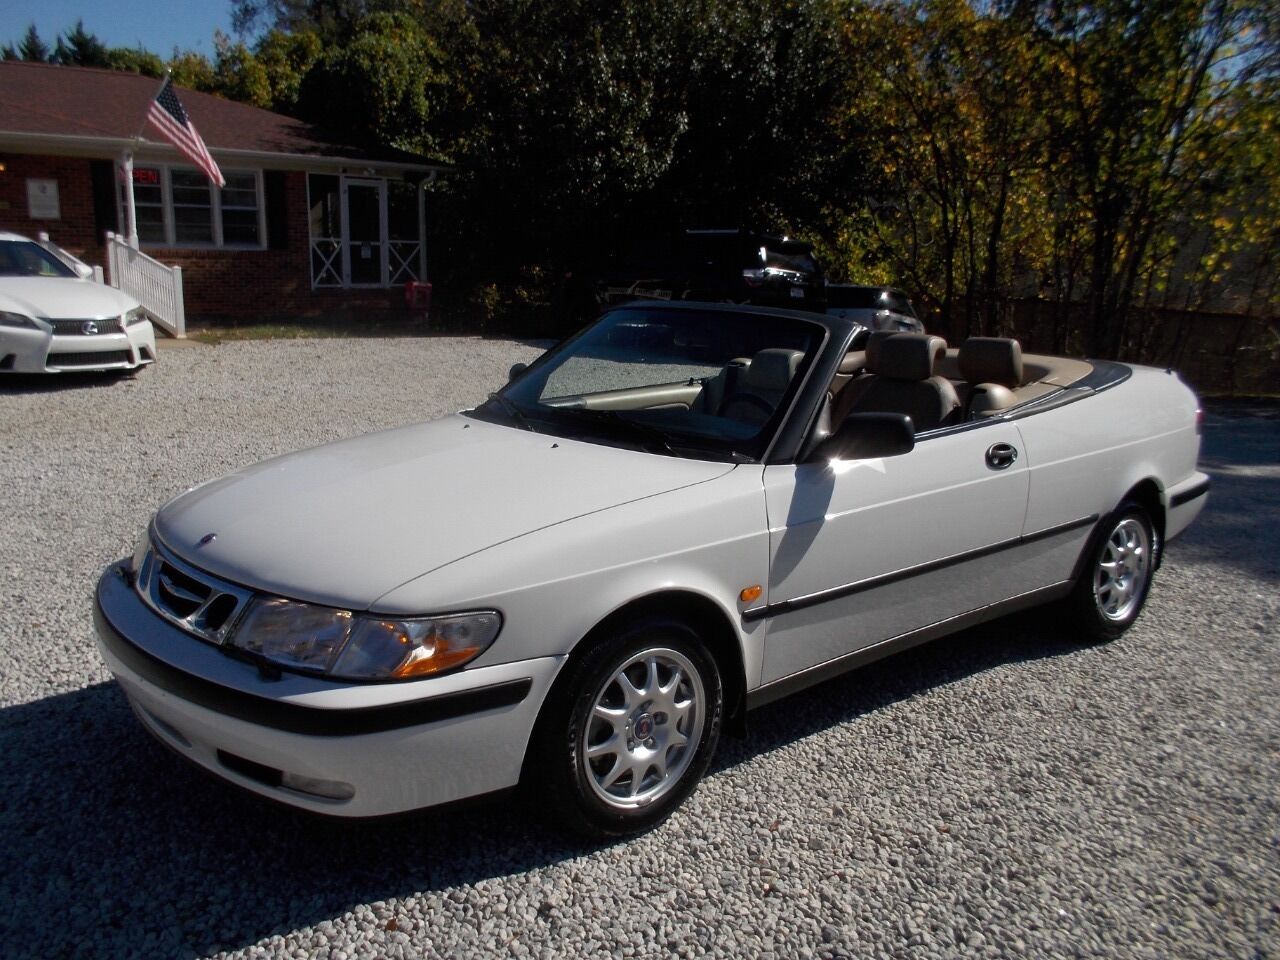 Preowned 2000 SAAB 9-3 Base 2dr Turbo Convertible for sale by Carolina Auto Connection in Spartanburg, SC